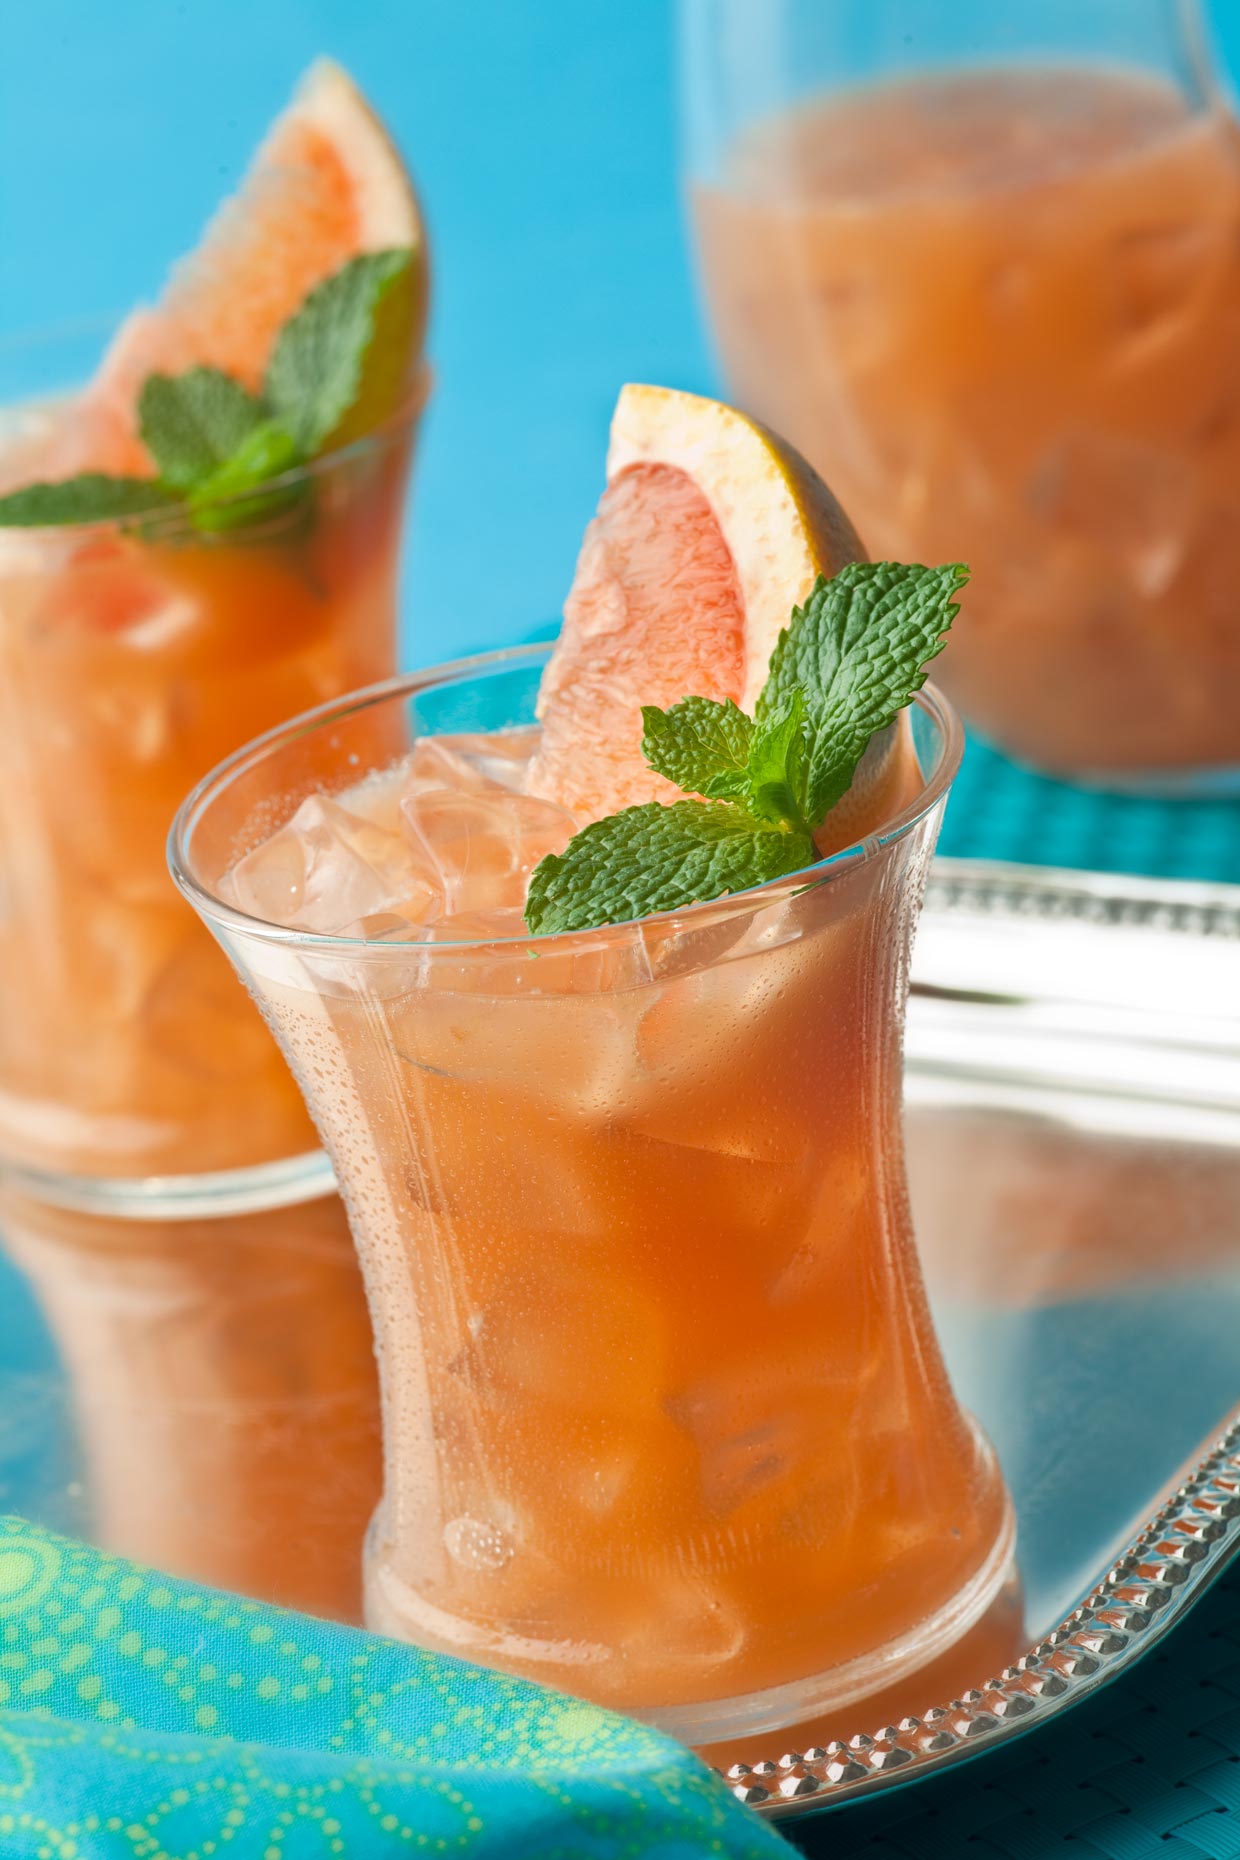 Beverage Photography | Citrus drinks with mint